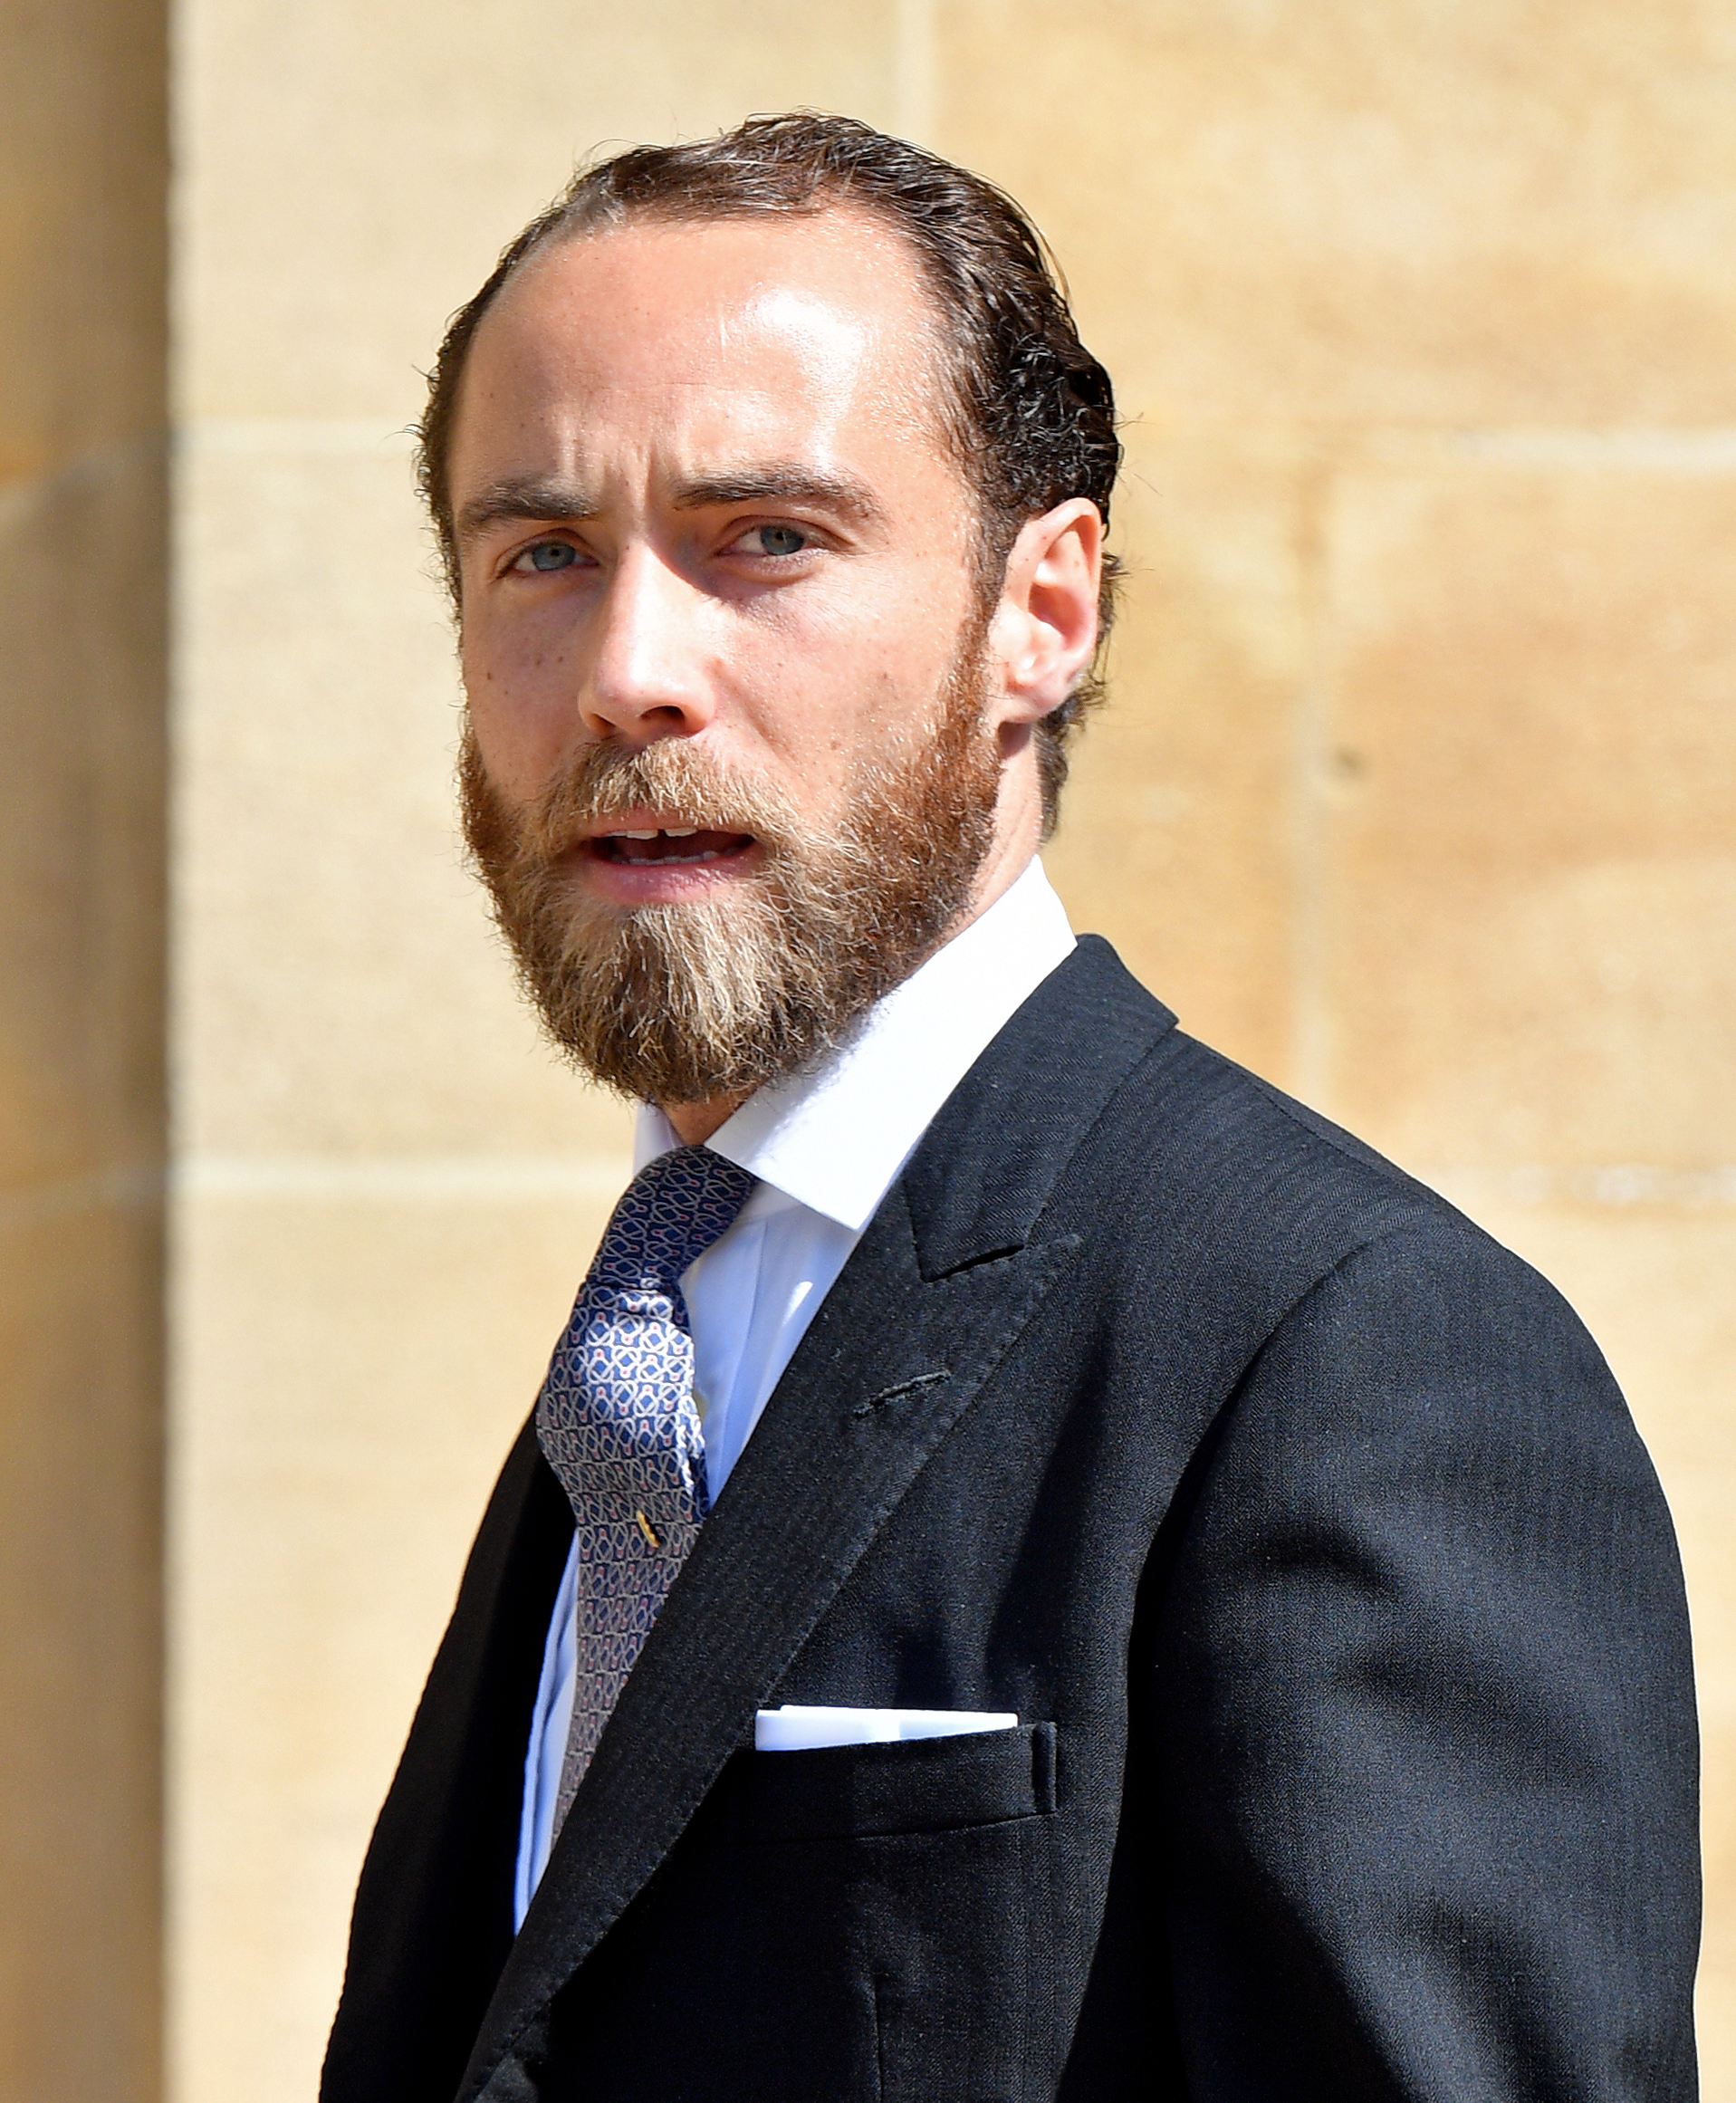 James Middleton at Prince Harry and Meghan Markle's wedding at Windsor Castle in 2018 | Source: Getty Images